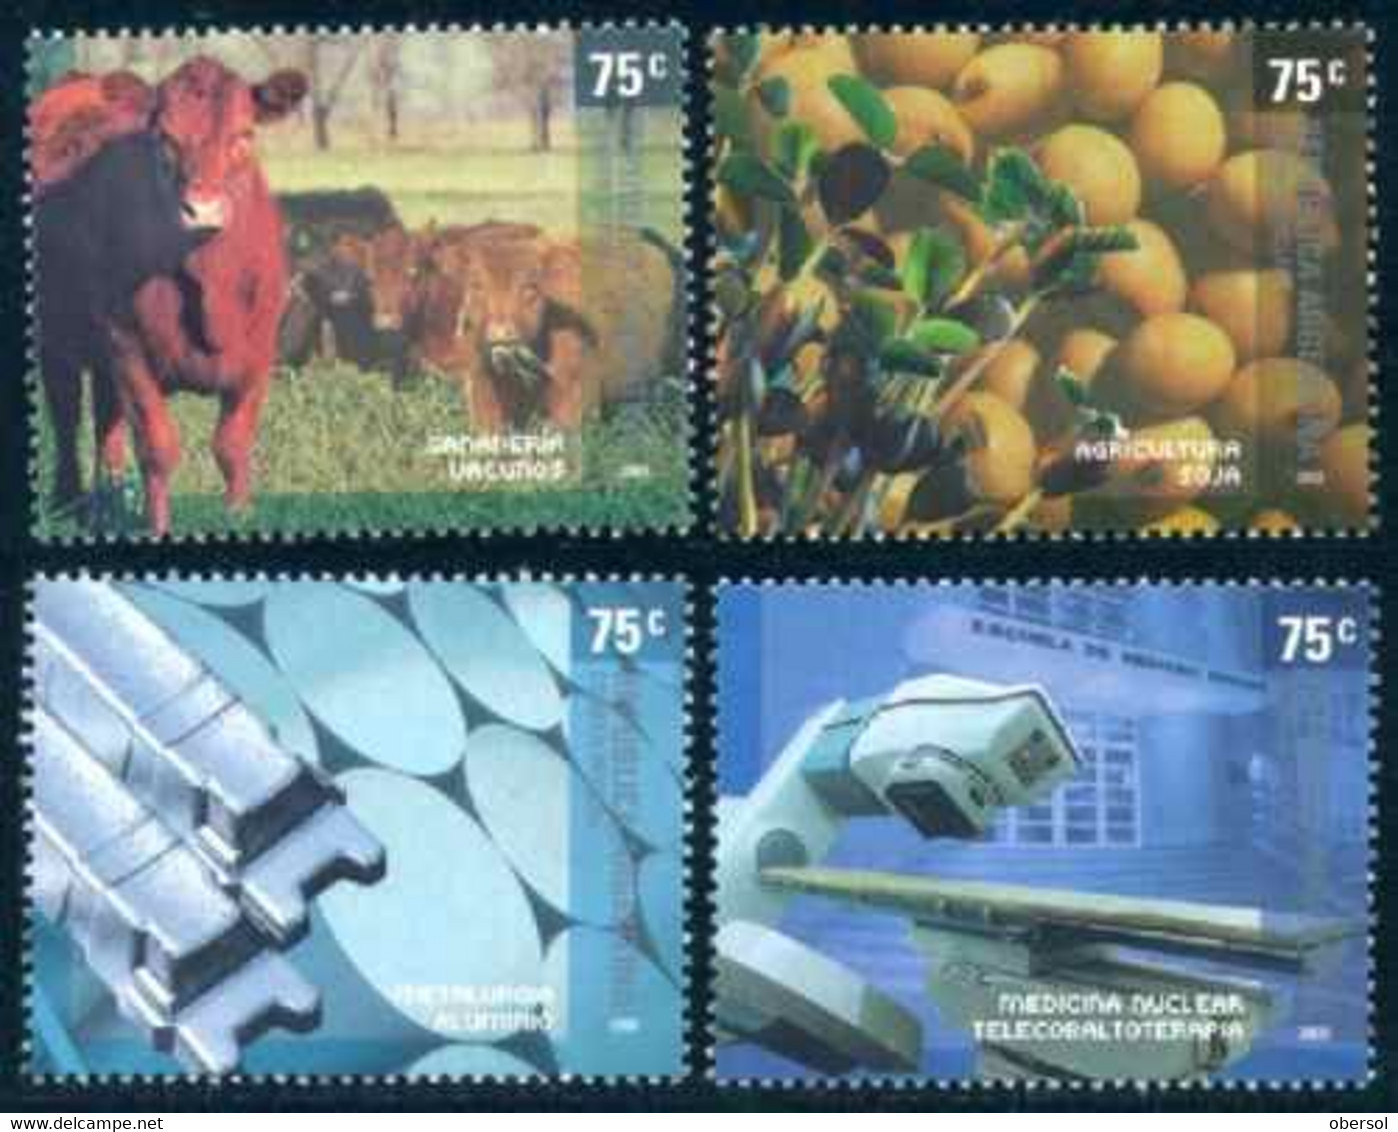 Argentina 2003 Technology, Industrie, Production Complete Set Of 4 Values MNH - Ungebraucht